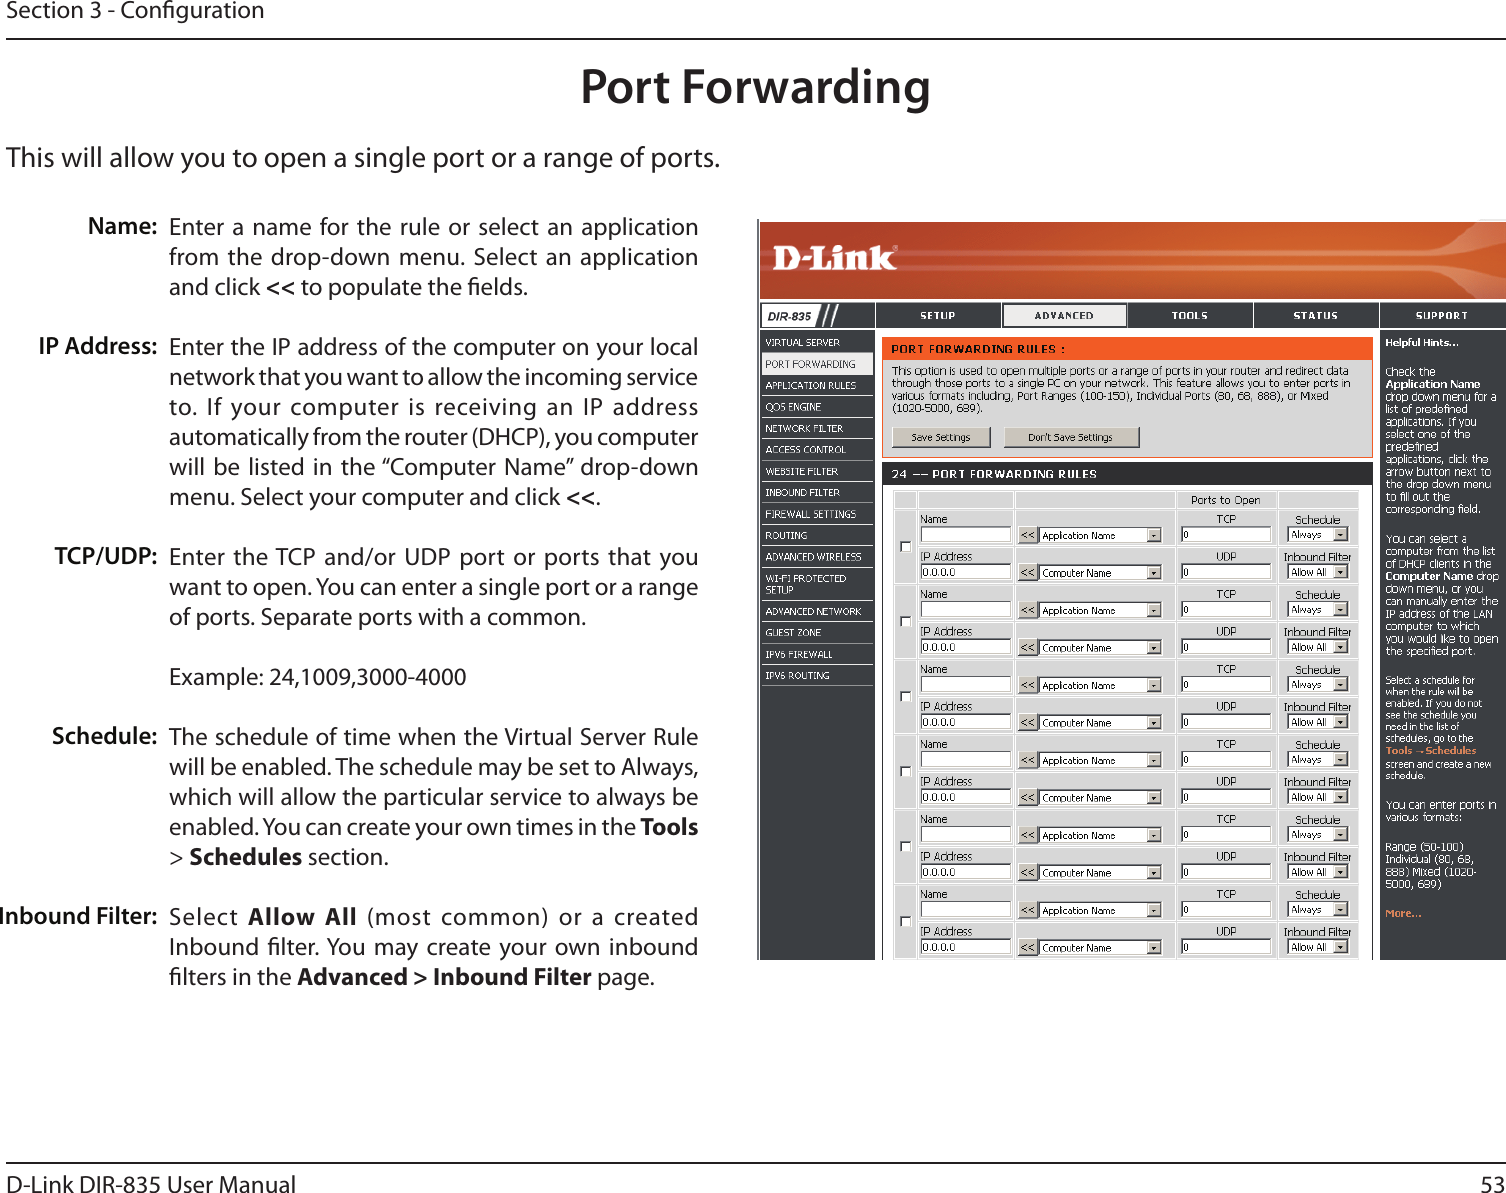 53D-Link DIR-835 User ManualSection 3 - CongurationThis will allow you to open a single port or a range of ports.Port ForwardingEnter a name  for the rule or  select  an application from the drop-down menu. Select an application and click &lt;&lt; to populate the elds.Enter the IP address of the computer on your local network that you want to allow the incoming service to. If  your computer is  receiving an IP  address automatically from the router (DHCP), you computer will be  listed in  the “Computer Name” drop-down menu. Select your computer and click &lt;&lt;. Enter the TCP and/or UDP port or ports that you want to open. You can enter a single port or a range of ports. Separate ports with a common.Example: 24,1009,3000-4000The schedule of time when the Virtual Server Rule will be enabled. The schedule may be set to Always, which will allow the particular service to always be enabled. You can create your own times in the Tools &gt; Schedules section.Select  Allow  All  (most common) or a created Inbound lter. You  may create your own inbound lters in the Advanced &gt; Inbound Filter page.Name:IP Address:TCP/UDP:Schedule:Inbound Filter: